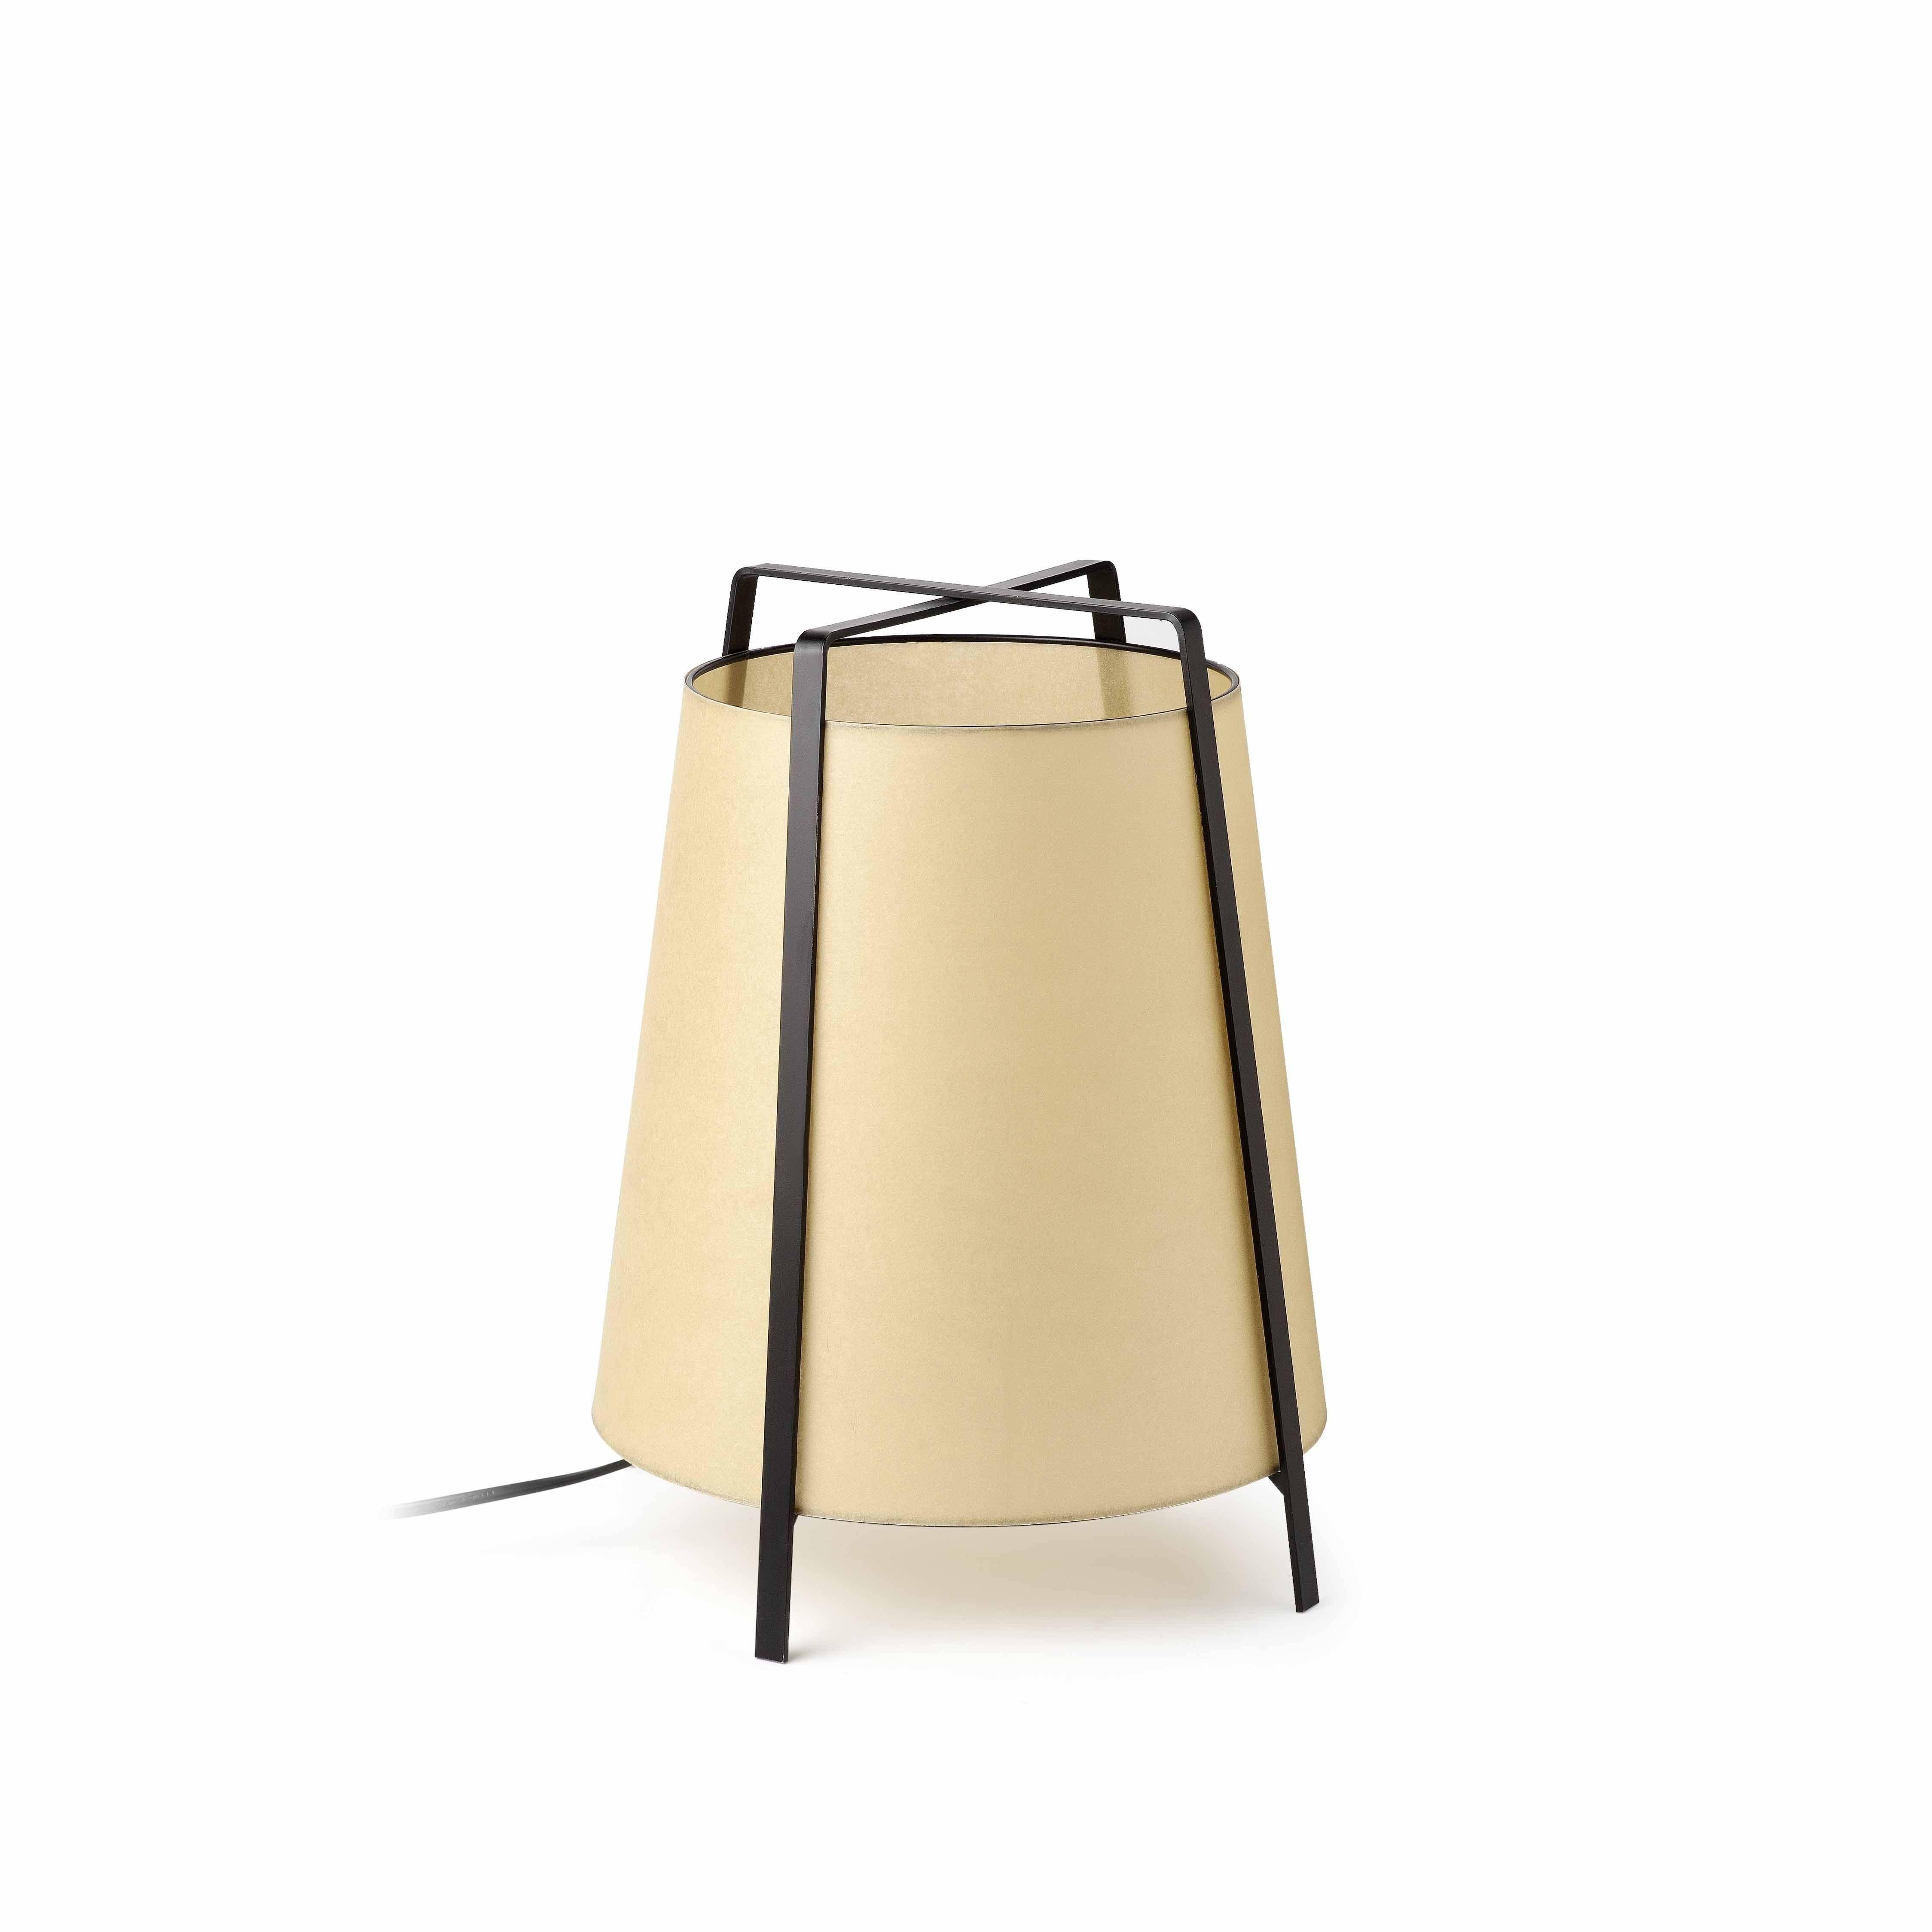 Akane 1 Light Table Lamp Black with Beige Shade E27